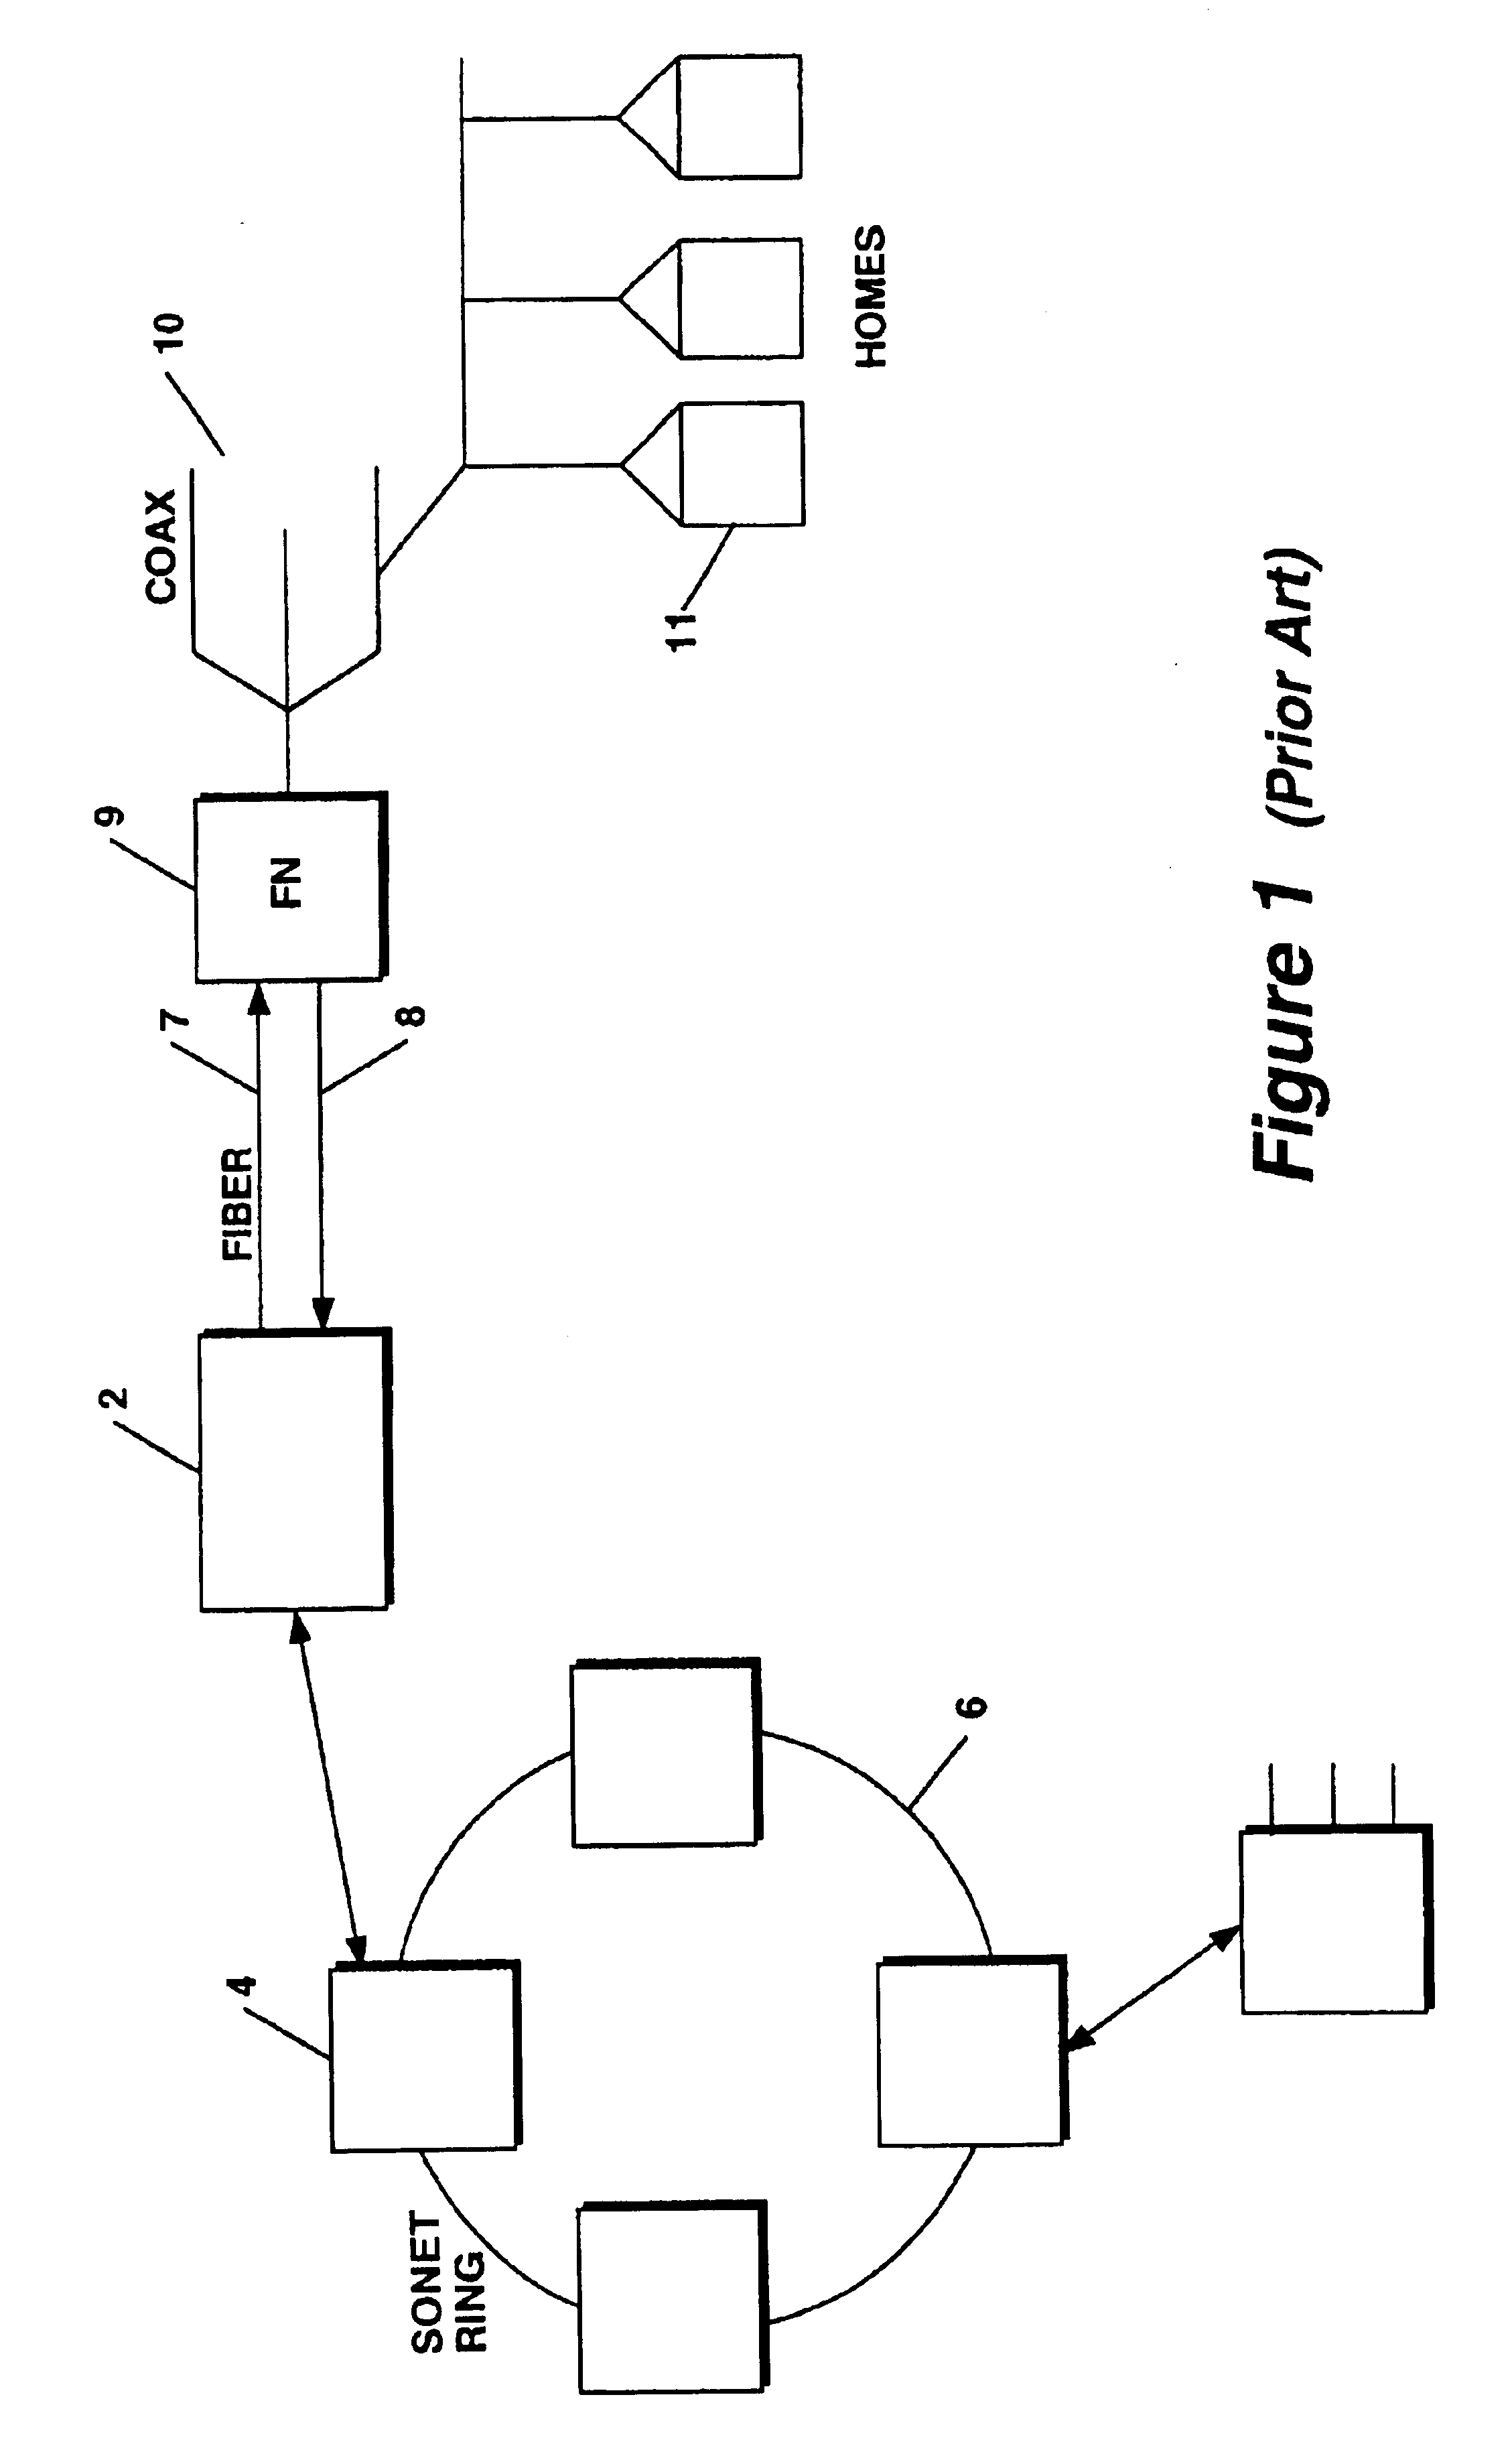 System and process for embedded cable modem in a cable modem termination system to enable diagnostics and monitoring